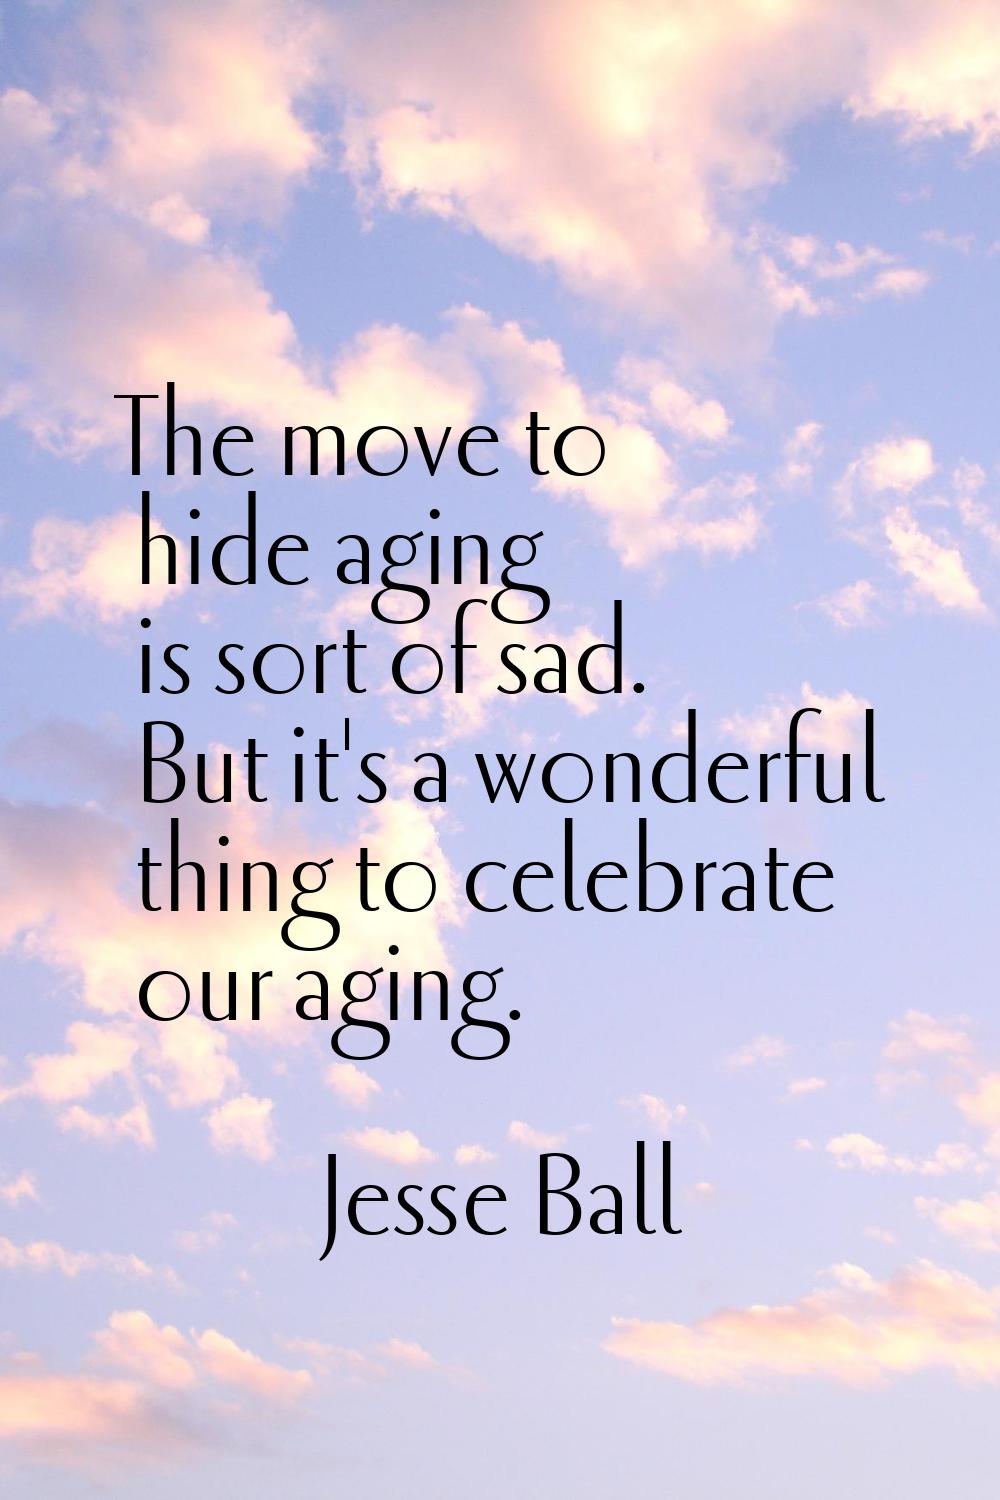 The move to hide aging is sort of sad. But it's a wonderful thing to celebrate our aging.